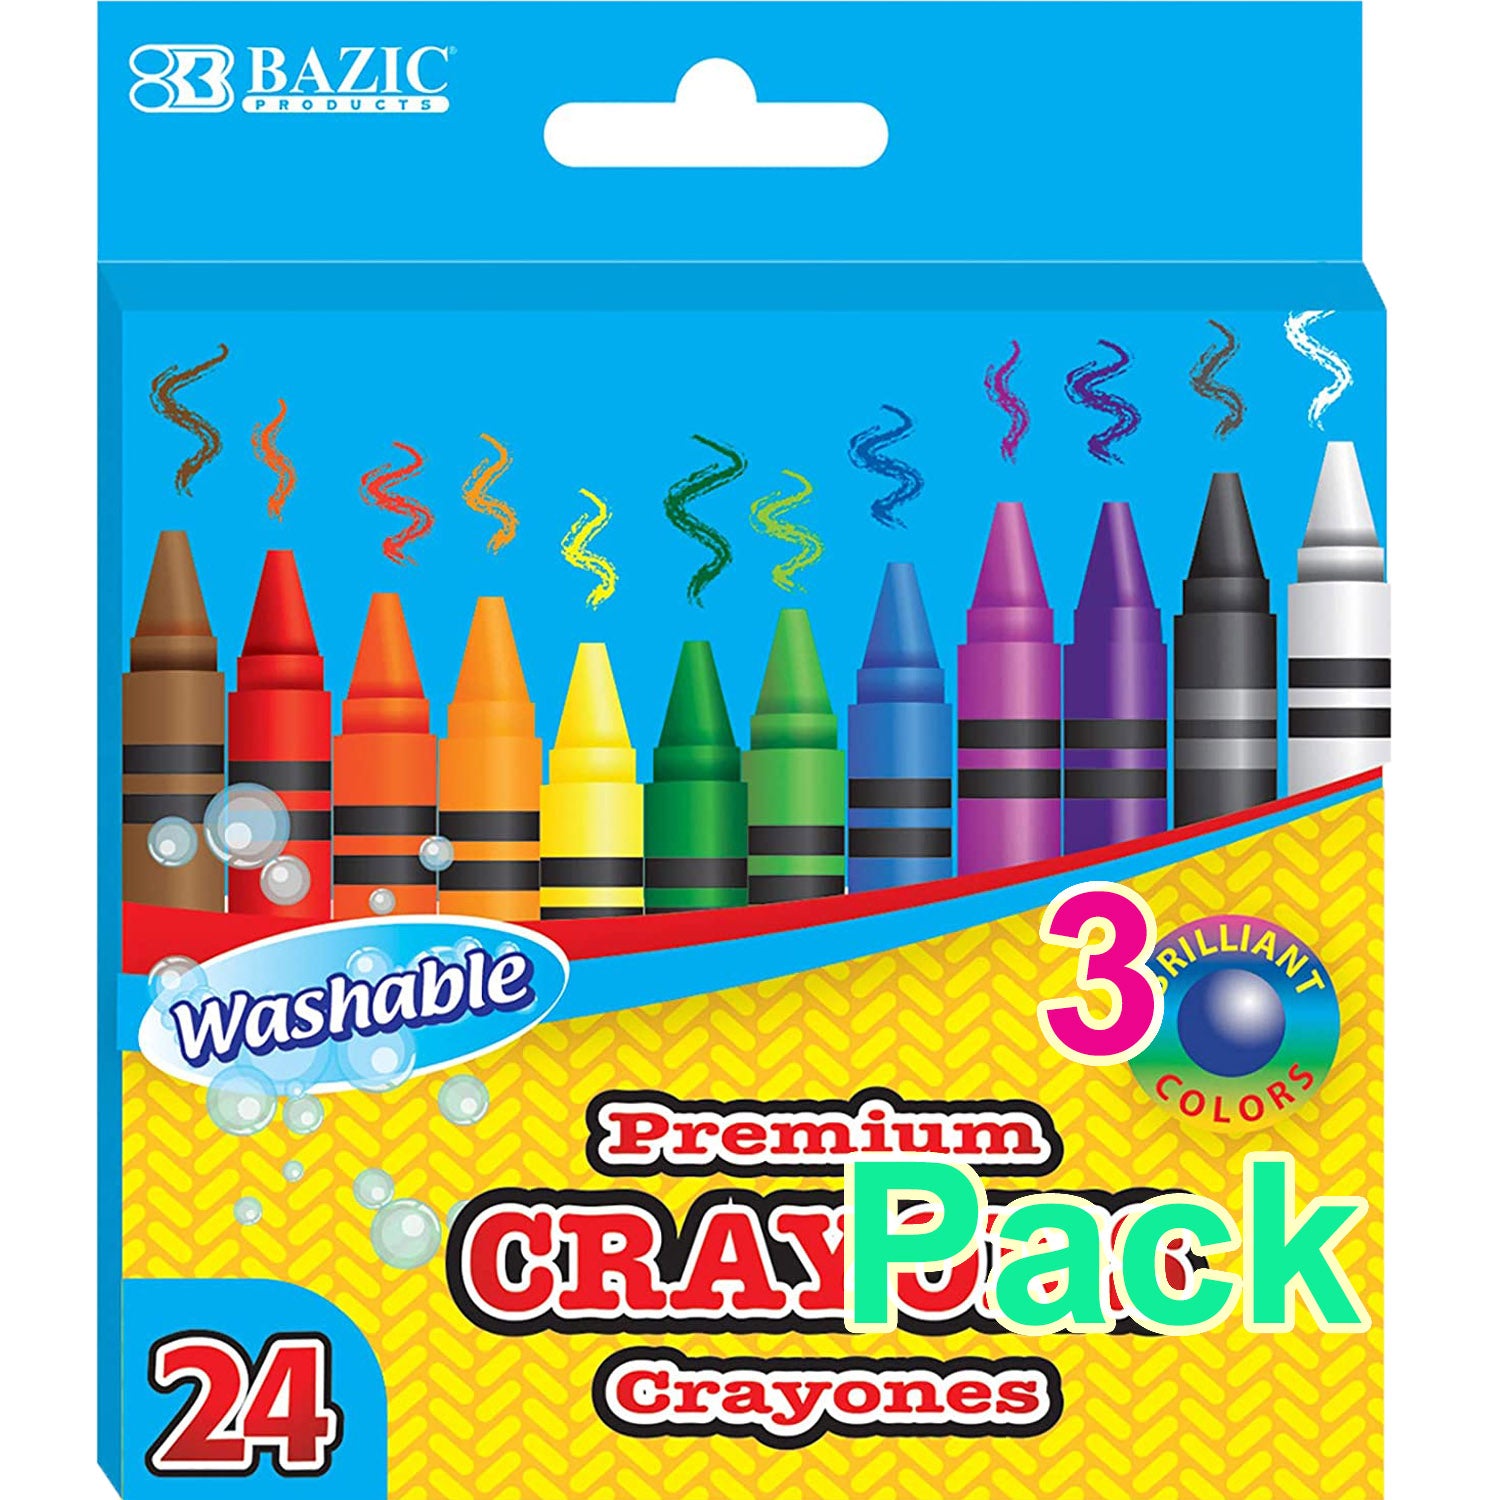 Premium Crayons Coloring Set, Assorted Colors Washable | 24-Count